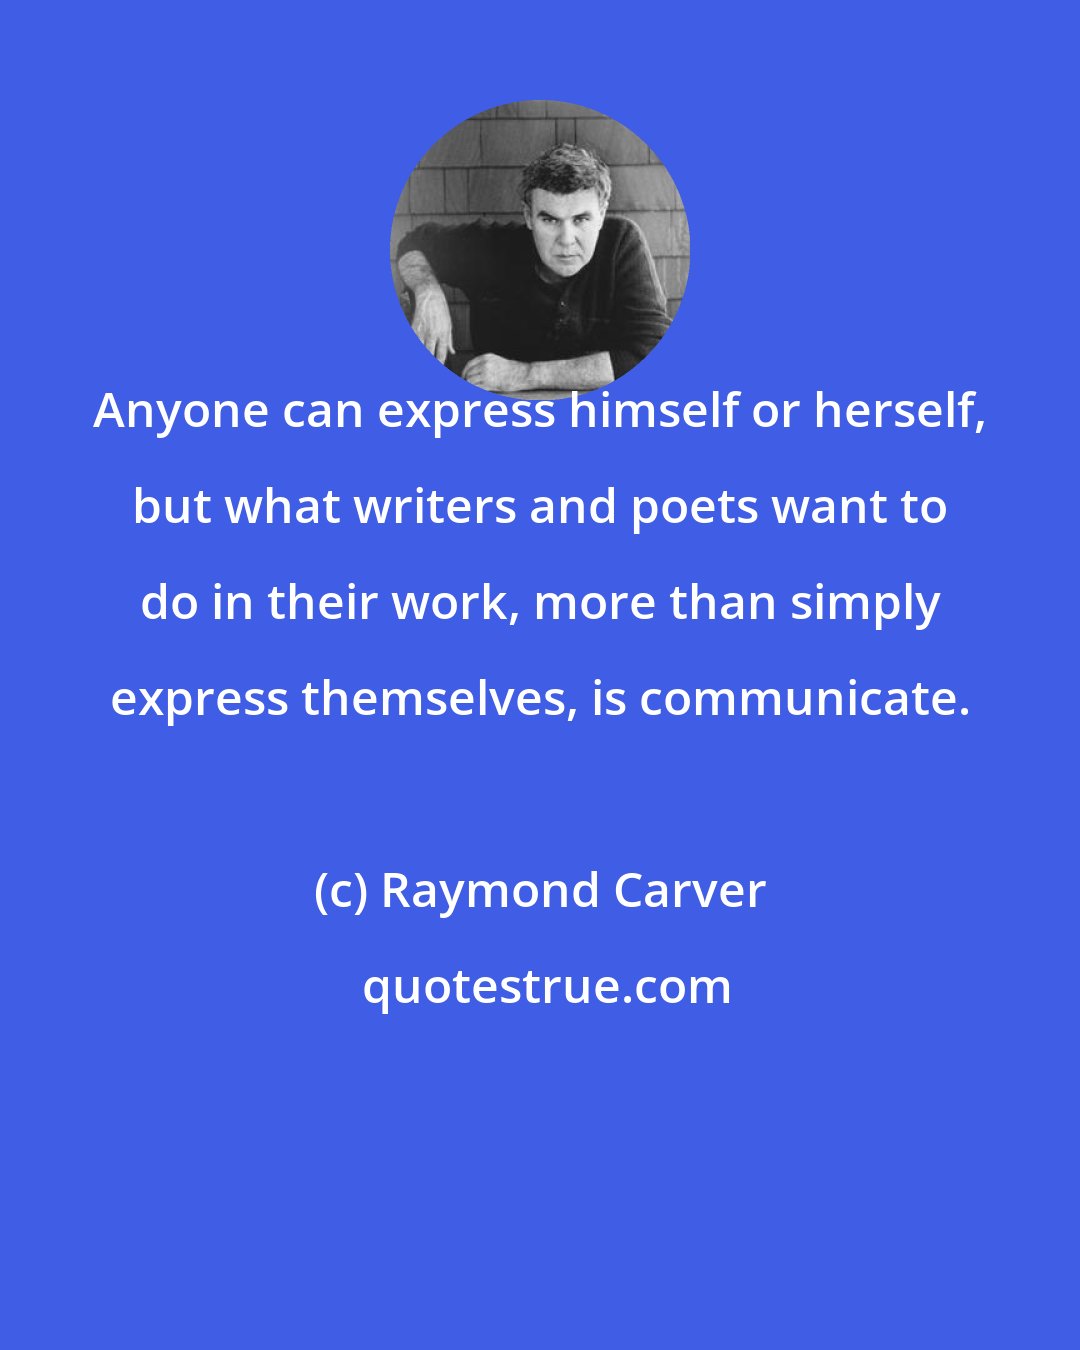 Raymond Carver: Anyone can express himself or herself, but what writers and poets want to do in their work, more than simply express themselves, is communicate.